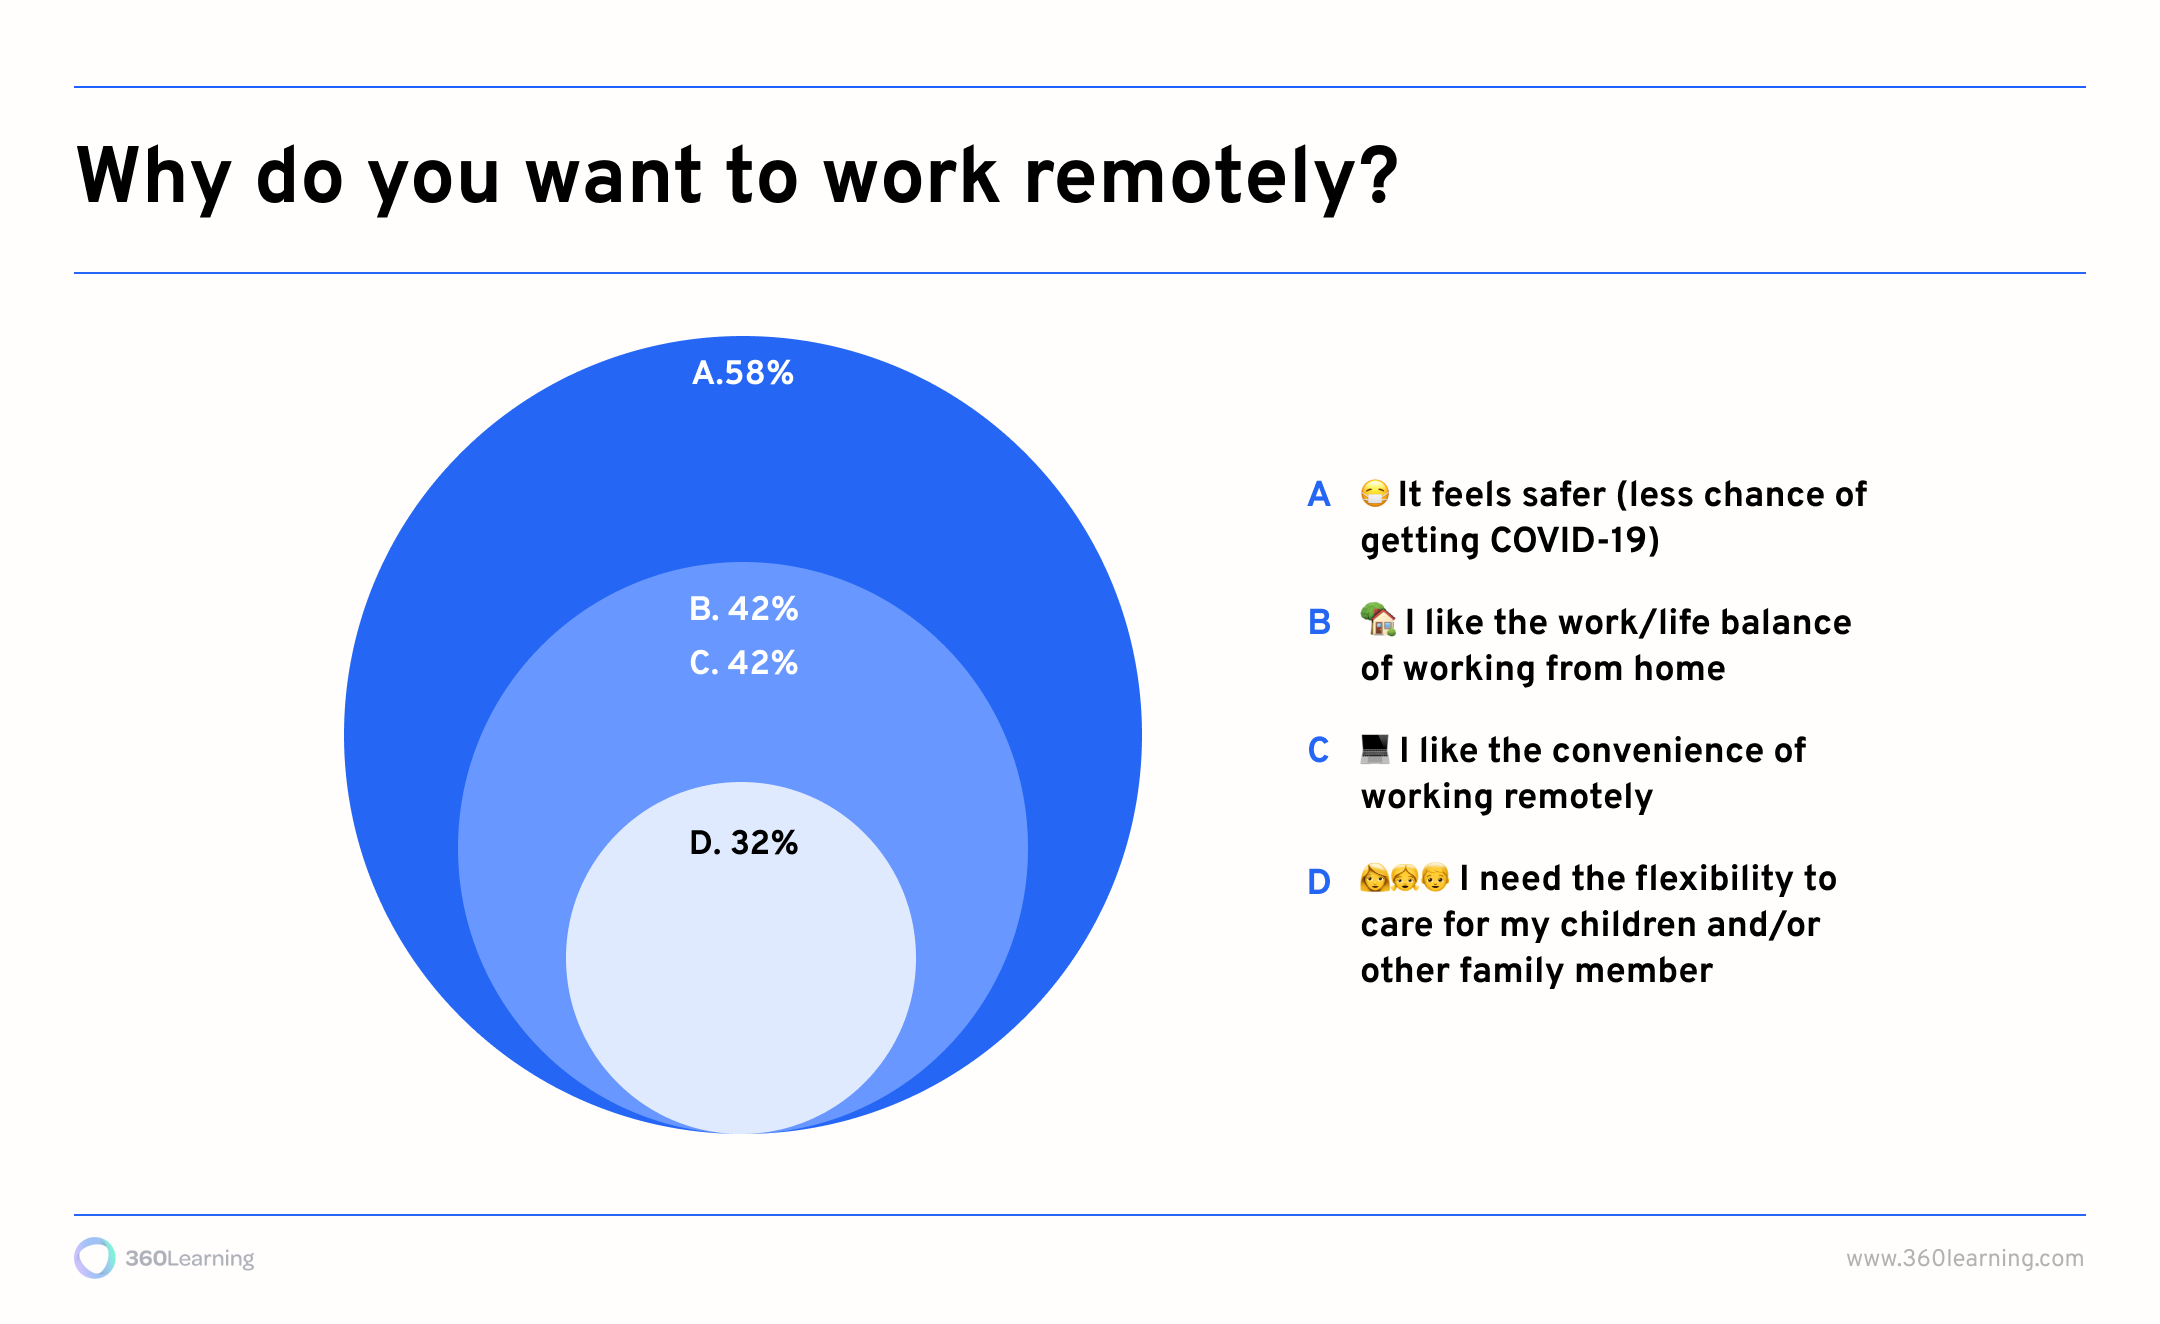 Why do you want to work remotely?